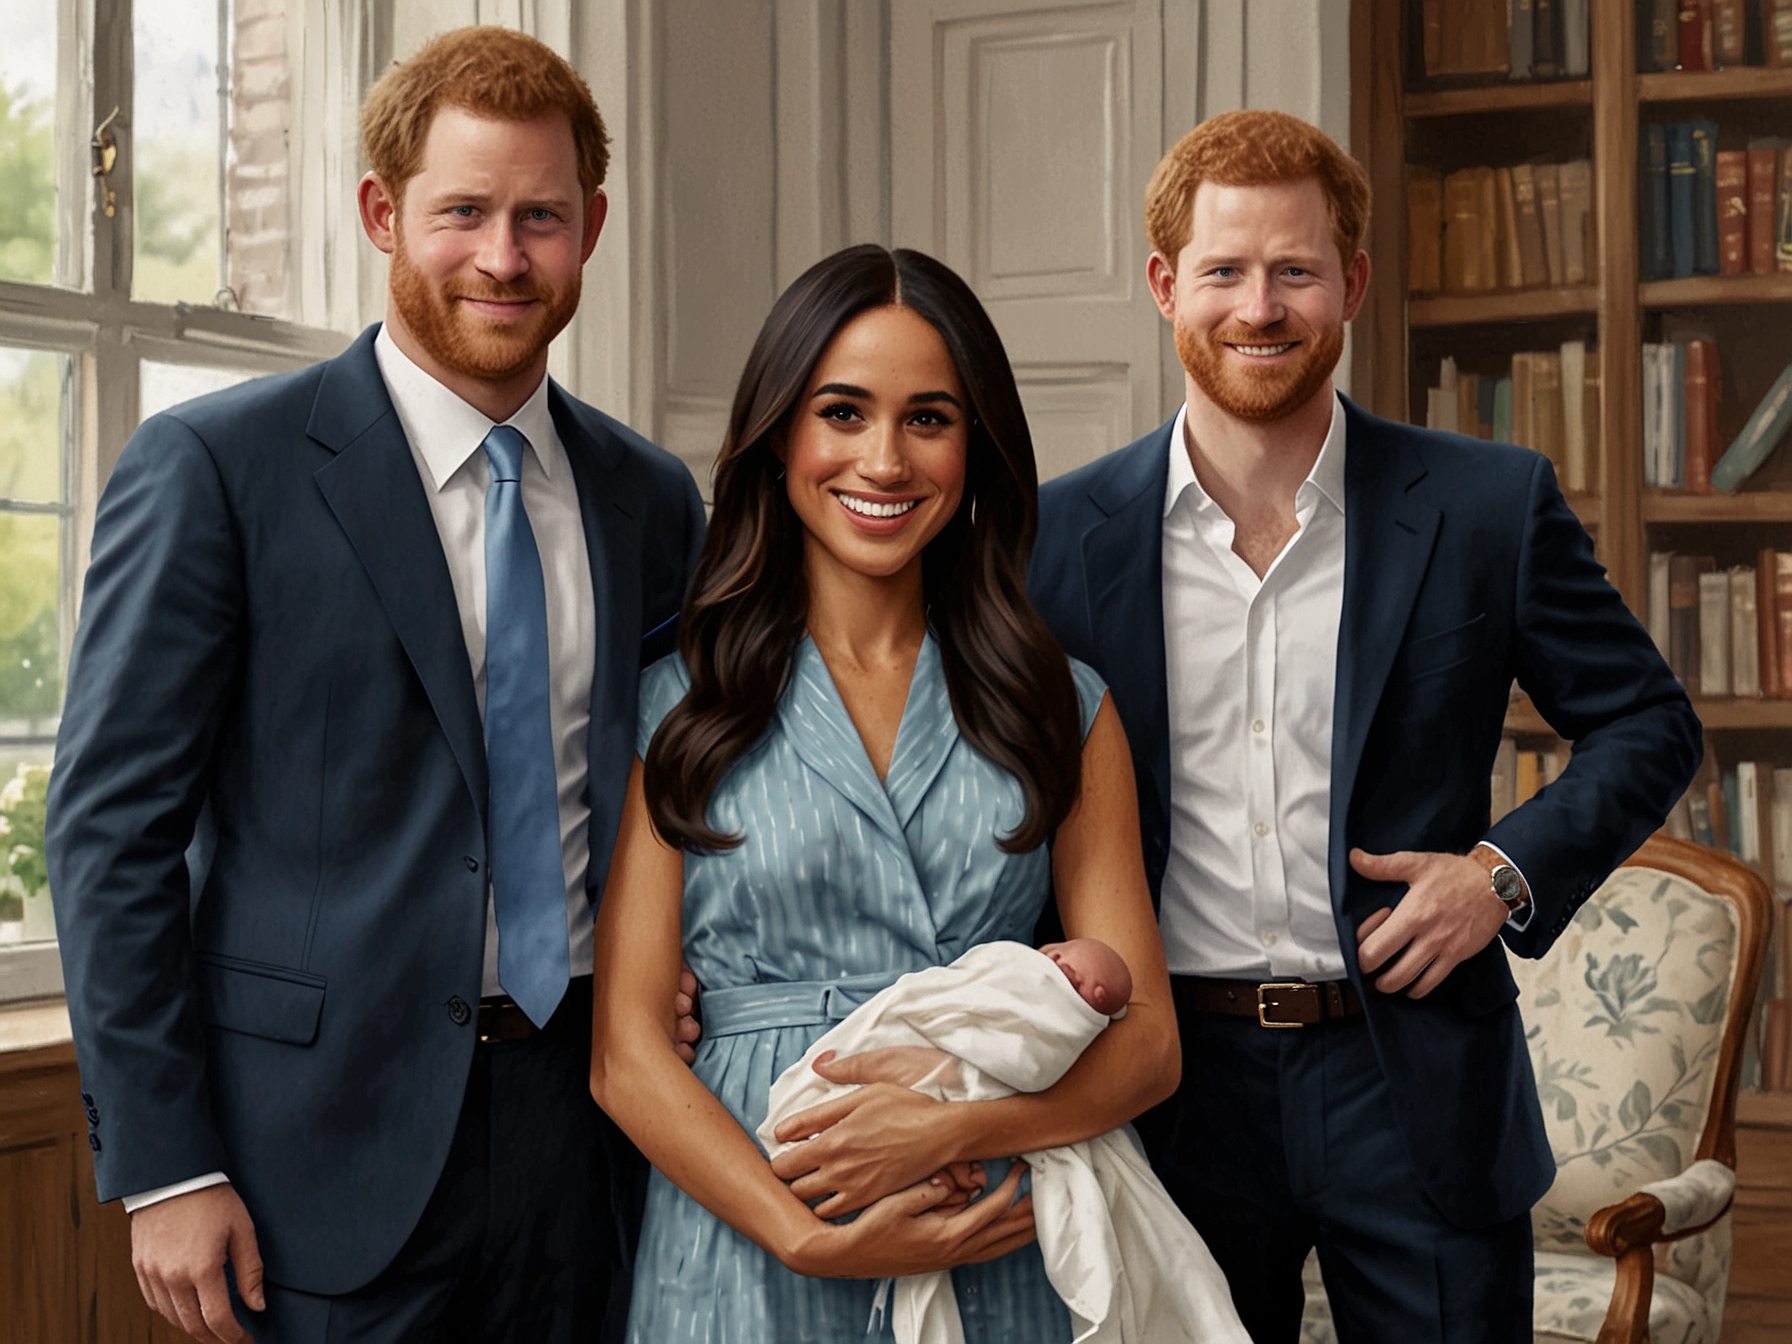 Archie and Lilibet with their parents, Prince Harry and Meghan Markle, symbolizing the family's new life in America and the emotional reunion King Charles hopes to achieve.